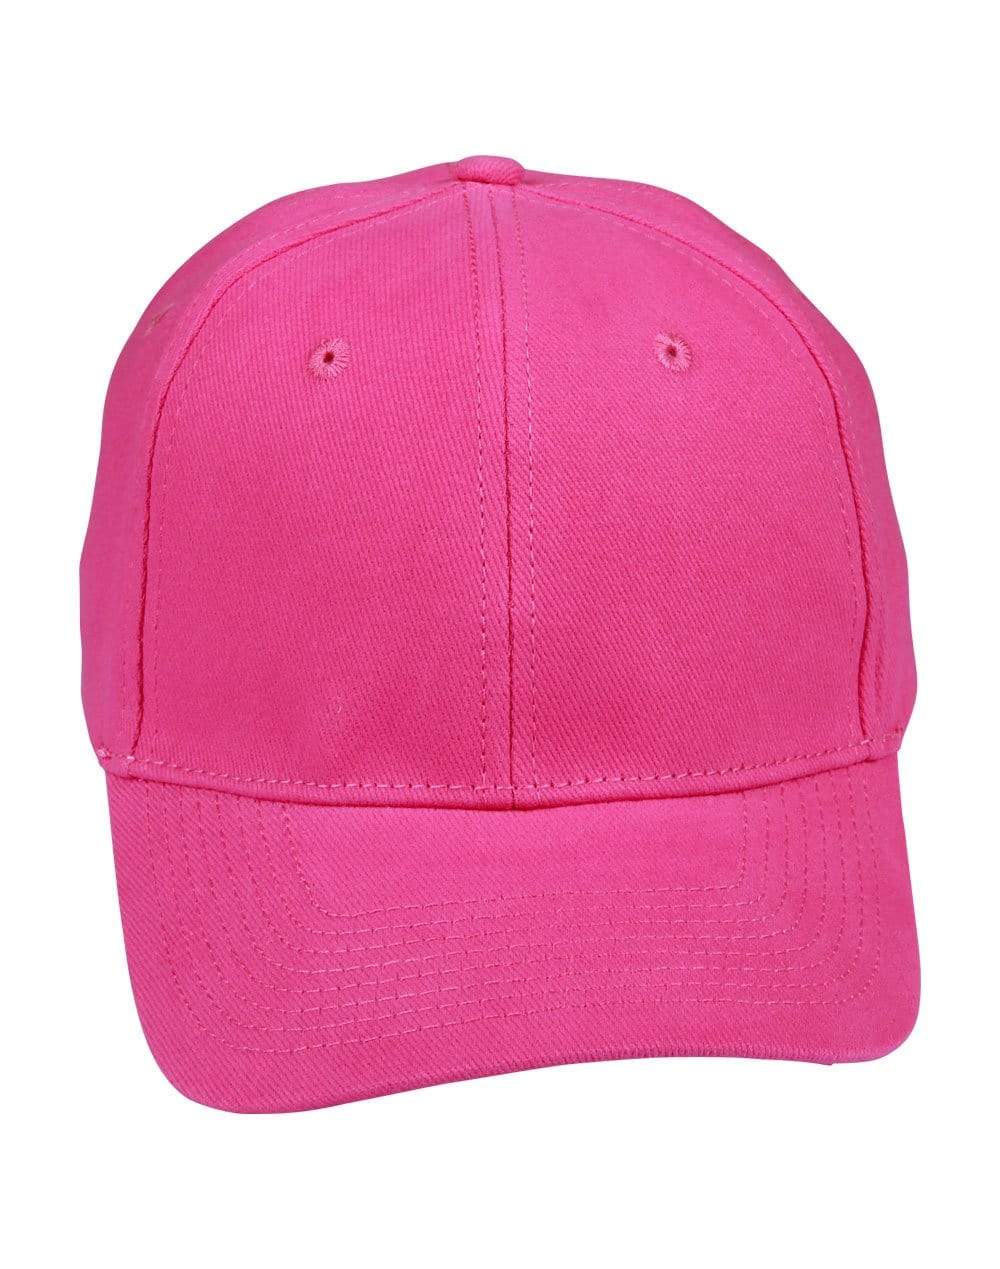 Heavy Brushed Cotton Cap Ch01 Active Wear Winning Spirit Hot Pink One size 